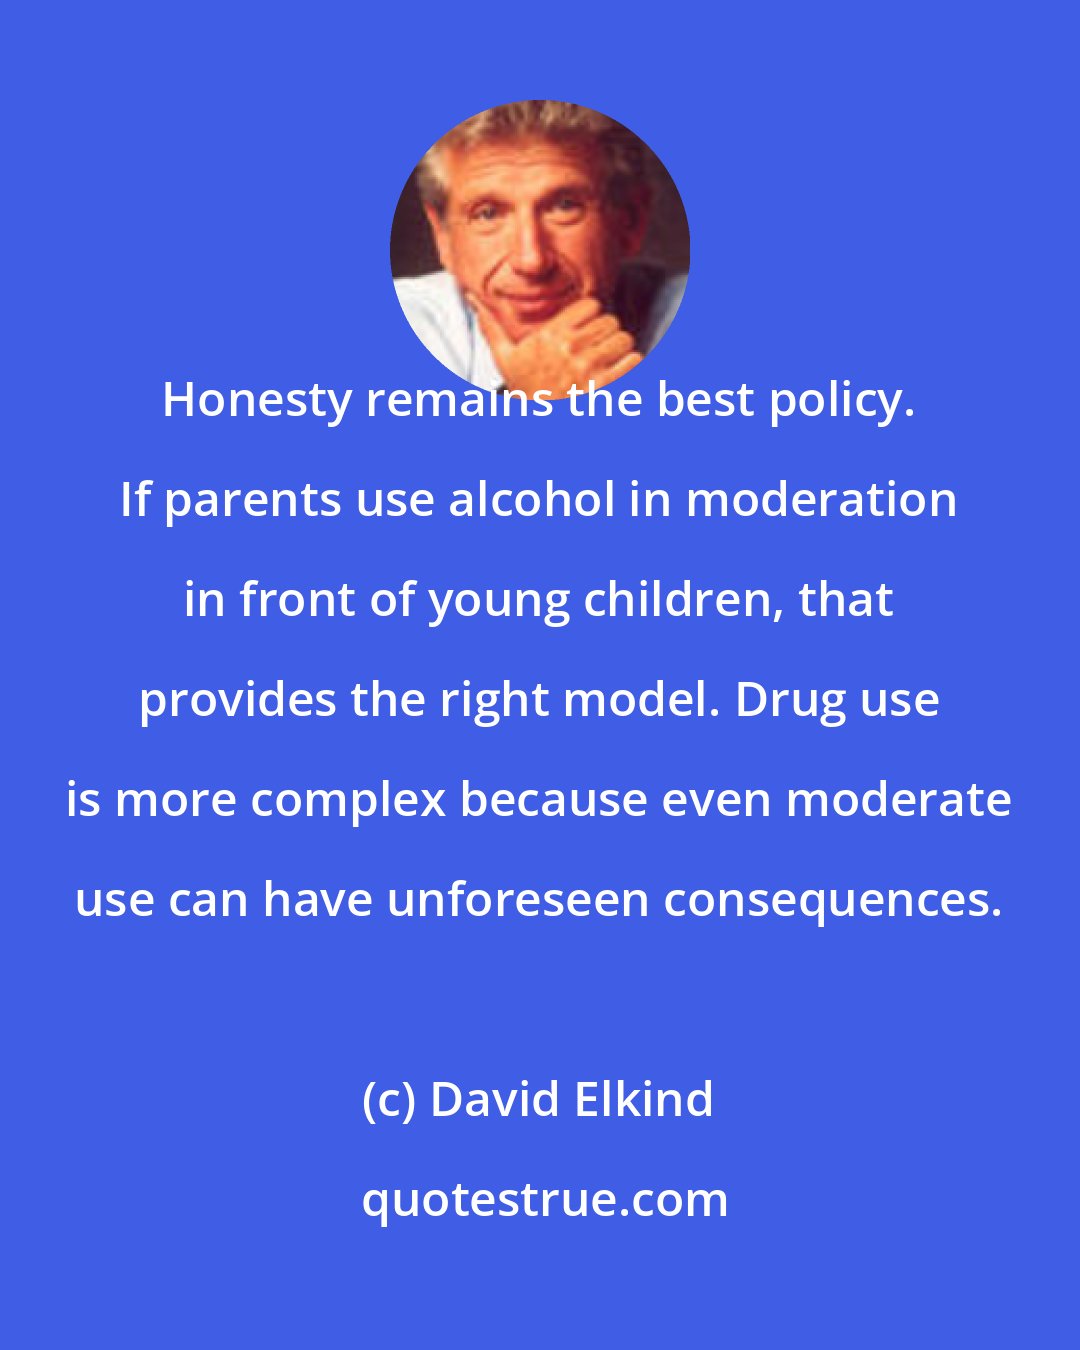 David Elkind: Honesty remains the best policy. If parents use alcohol in moderation in front of young children, that provides the right model. Drug use is more complex because even moderate use can have unforeseen consequences.